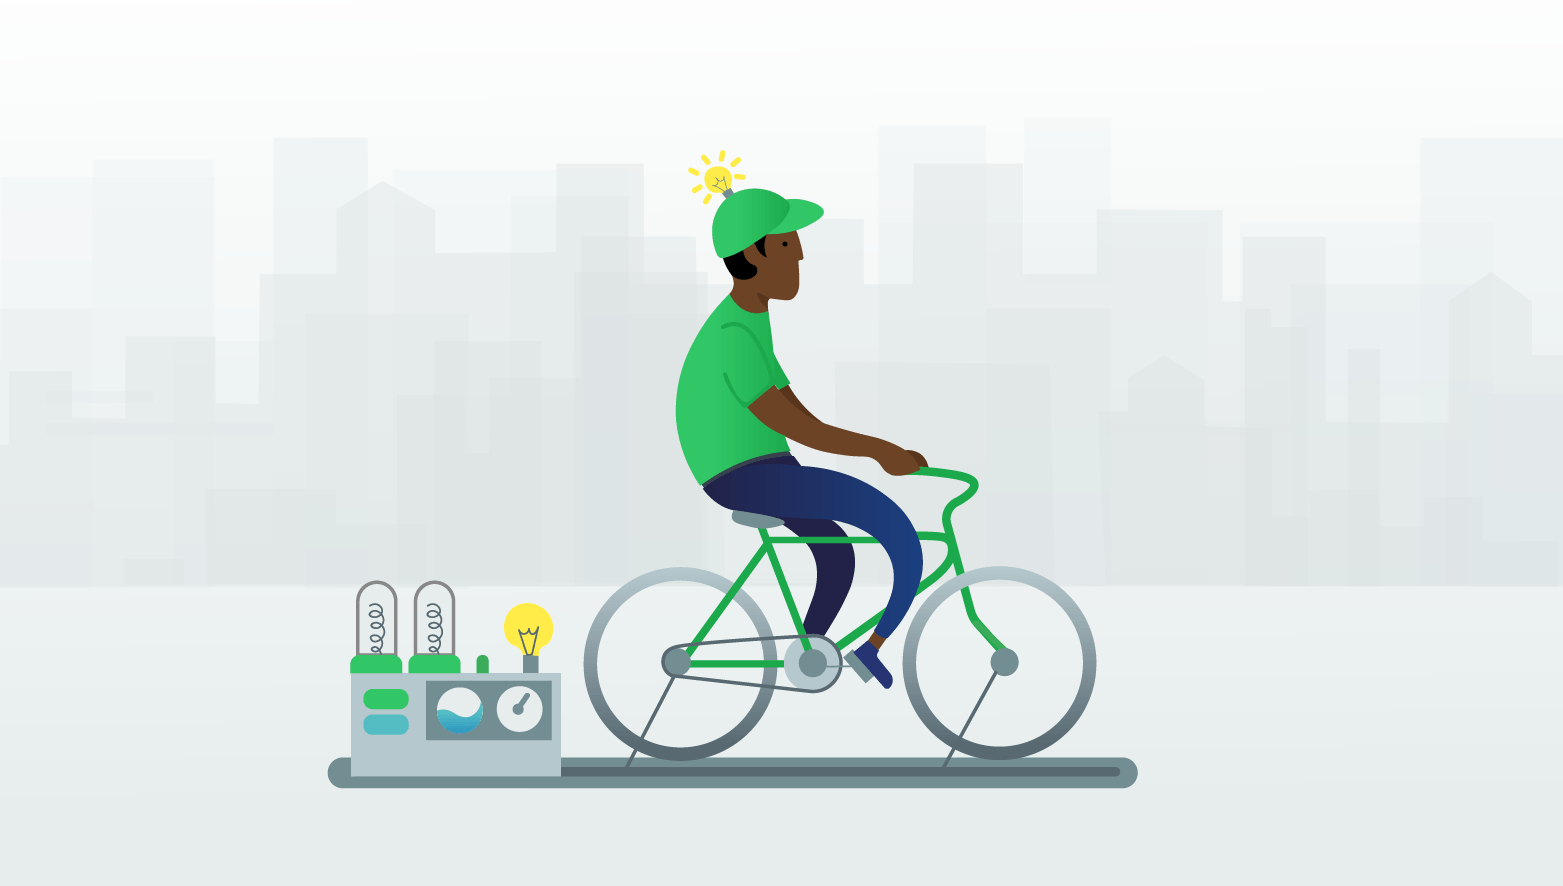 Illustration of a man riding a bicycle-powered generator